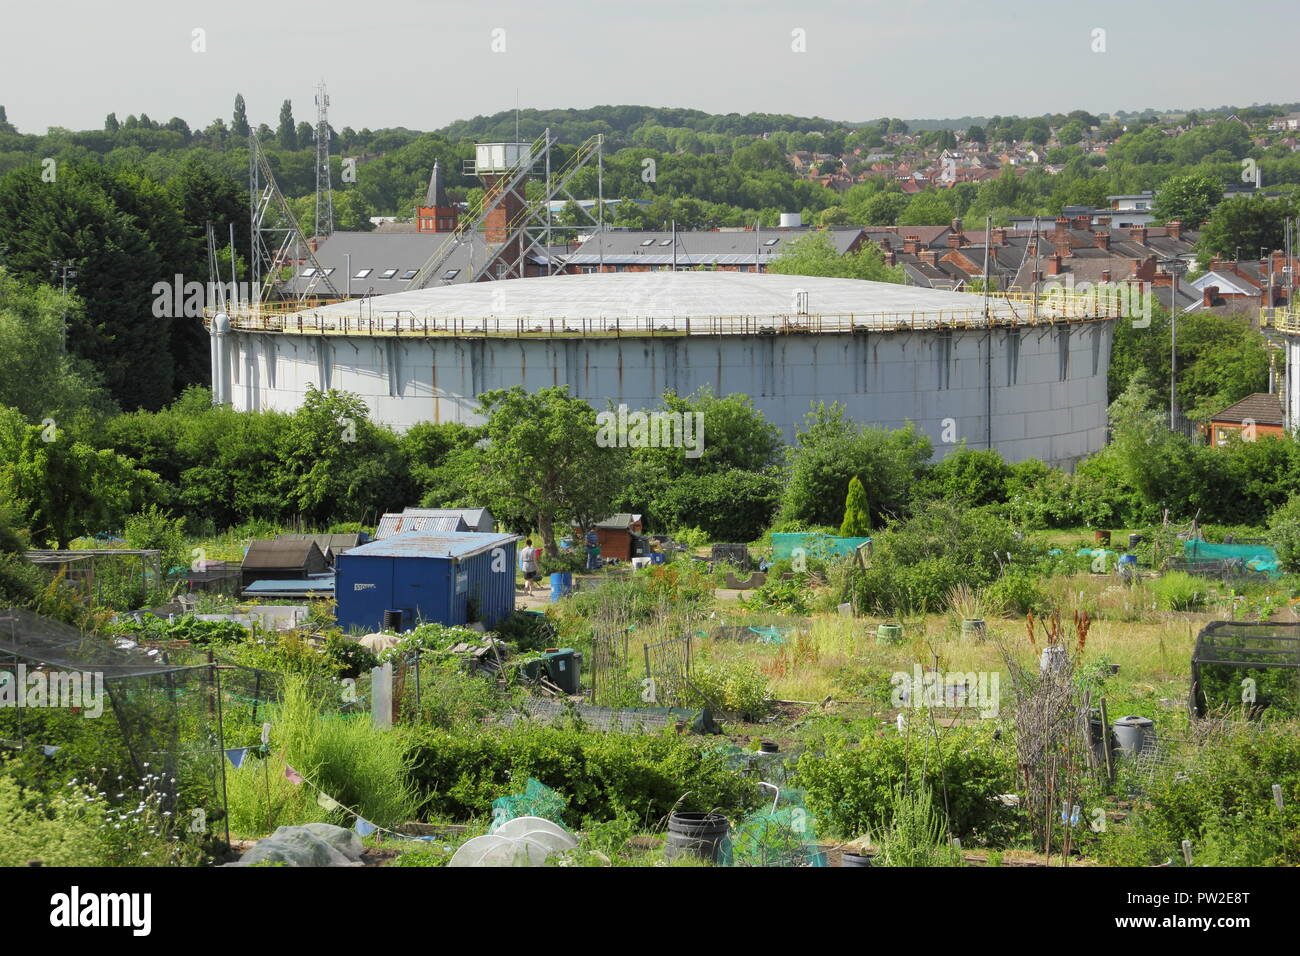 Decommissioned gasometers, or gas holders next to urban allottments, near Chatsworth Road, Chesterfield, Derbyshire, England uk Stock Photo